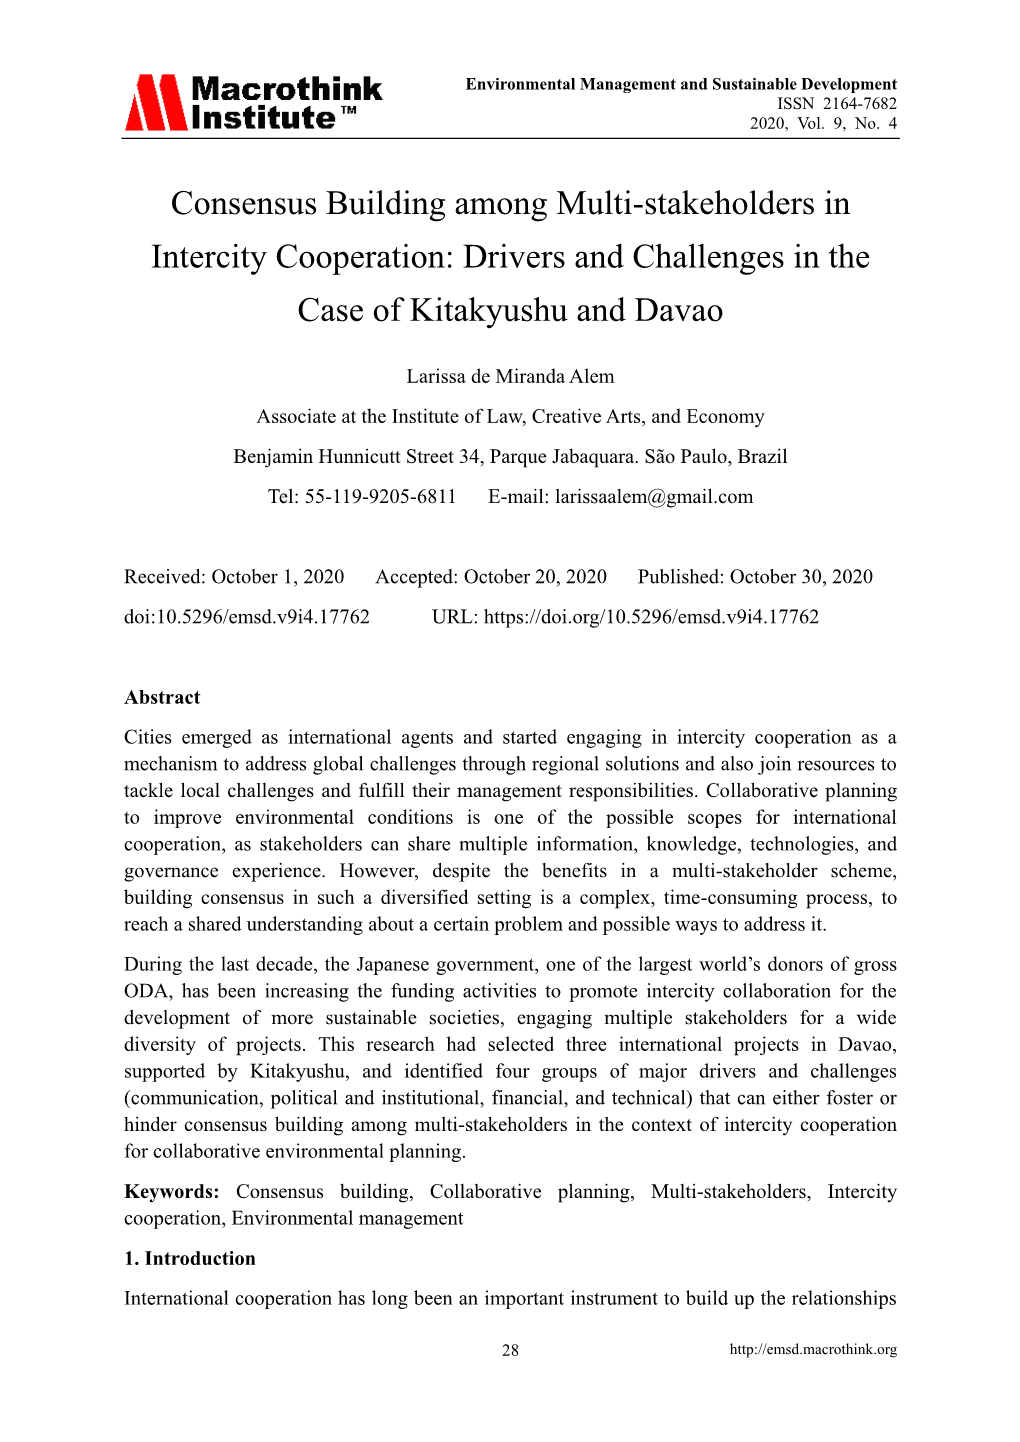 Consensus Building Among Multi-Stakeholders in Intercity Cooperation: Drivers and Challenges in the Case of Kitakyushu and Davao